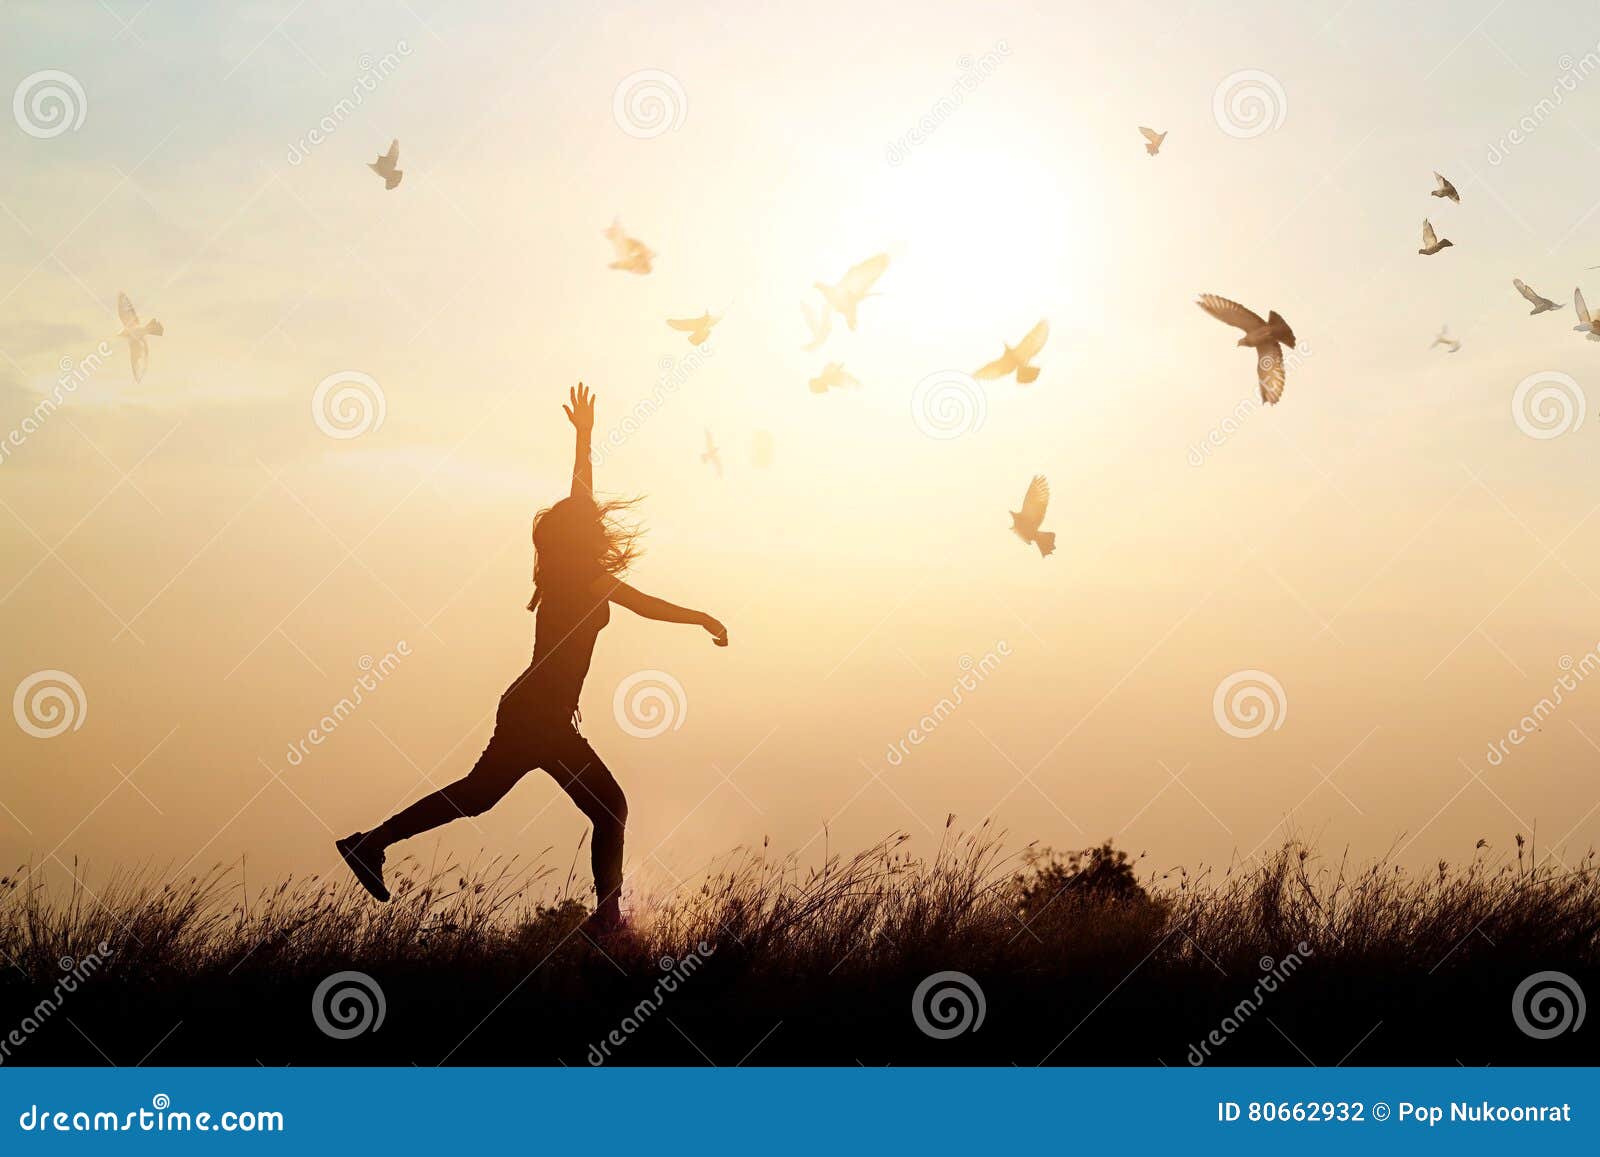 woman and flying birds enjoying life in nature on sunset